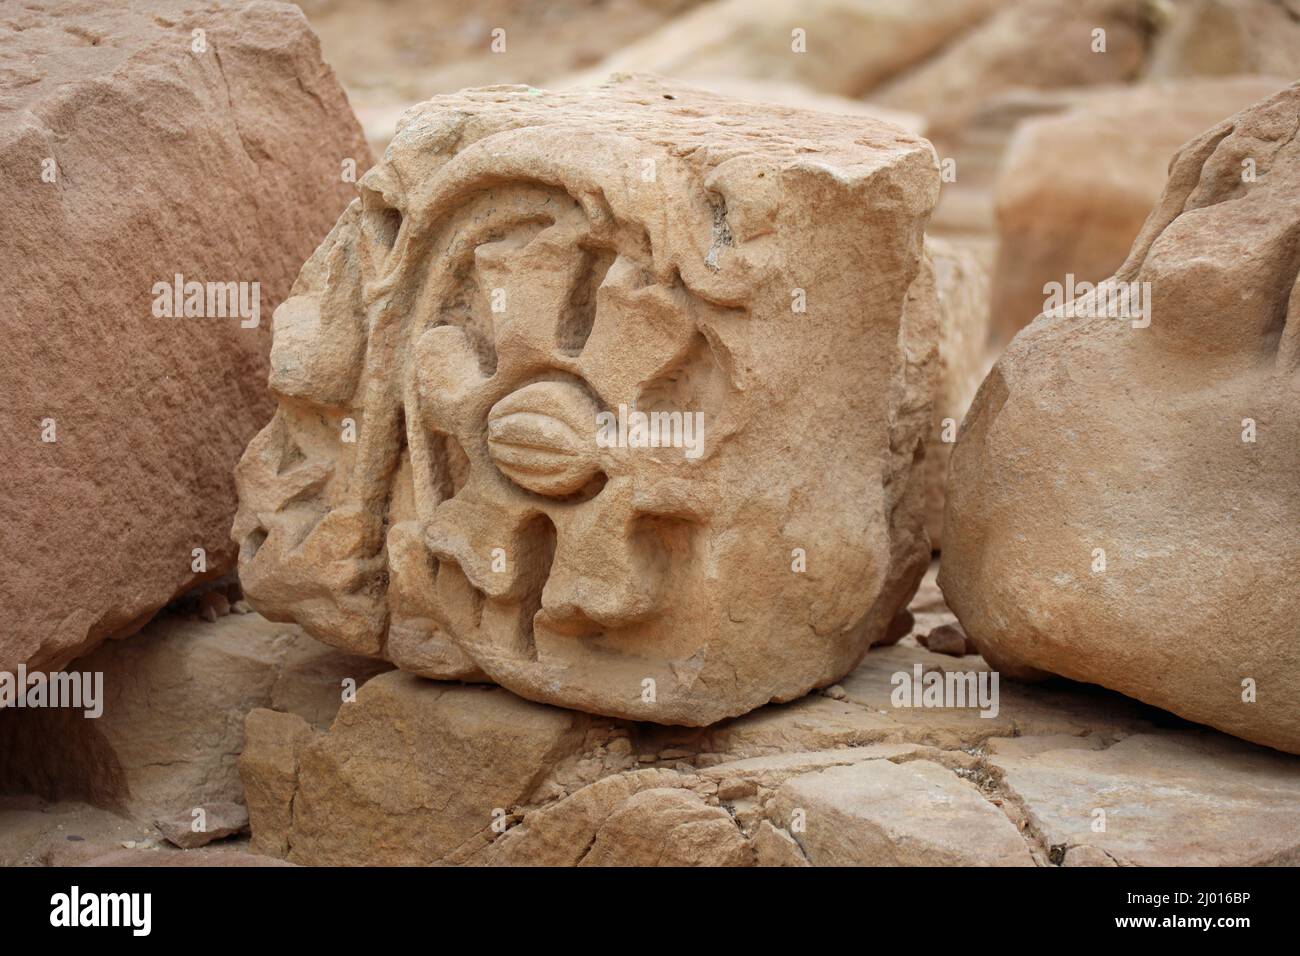 Carved stone remains at Petra in Jordan Stock Photo